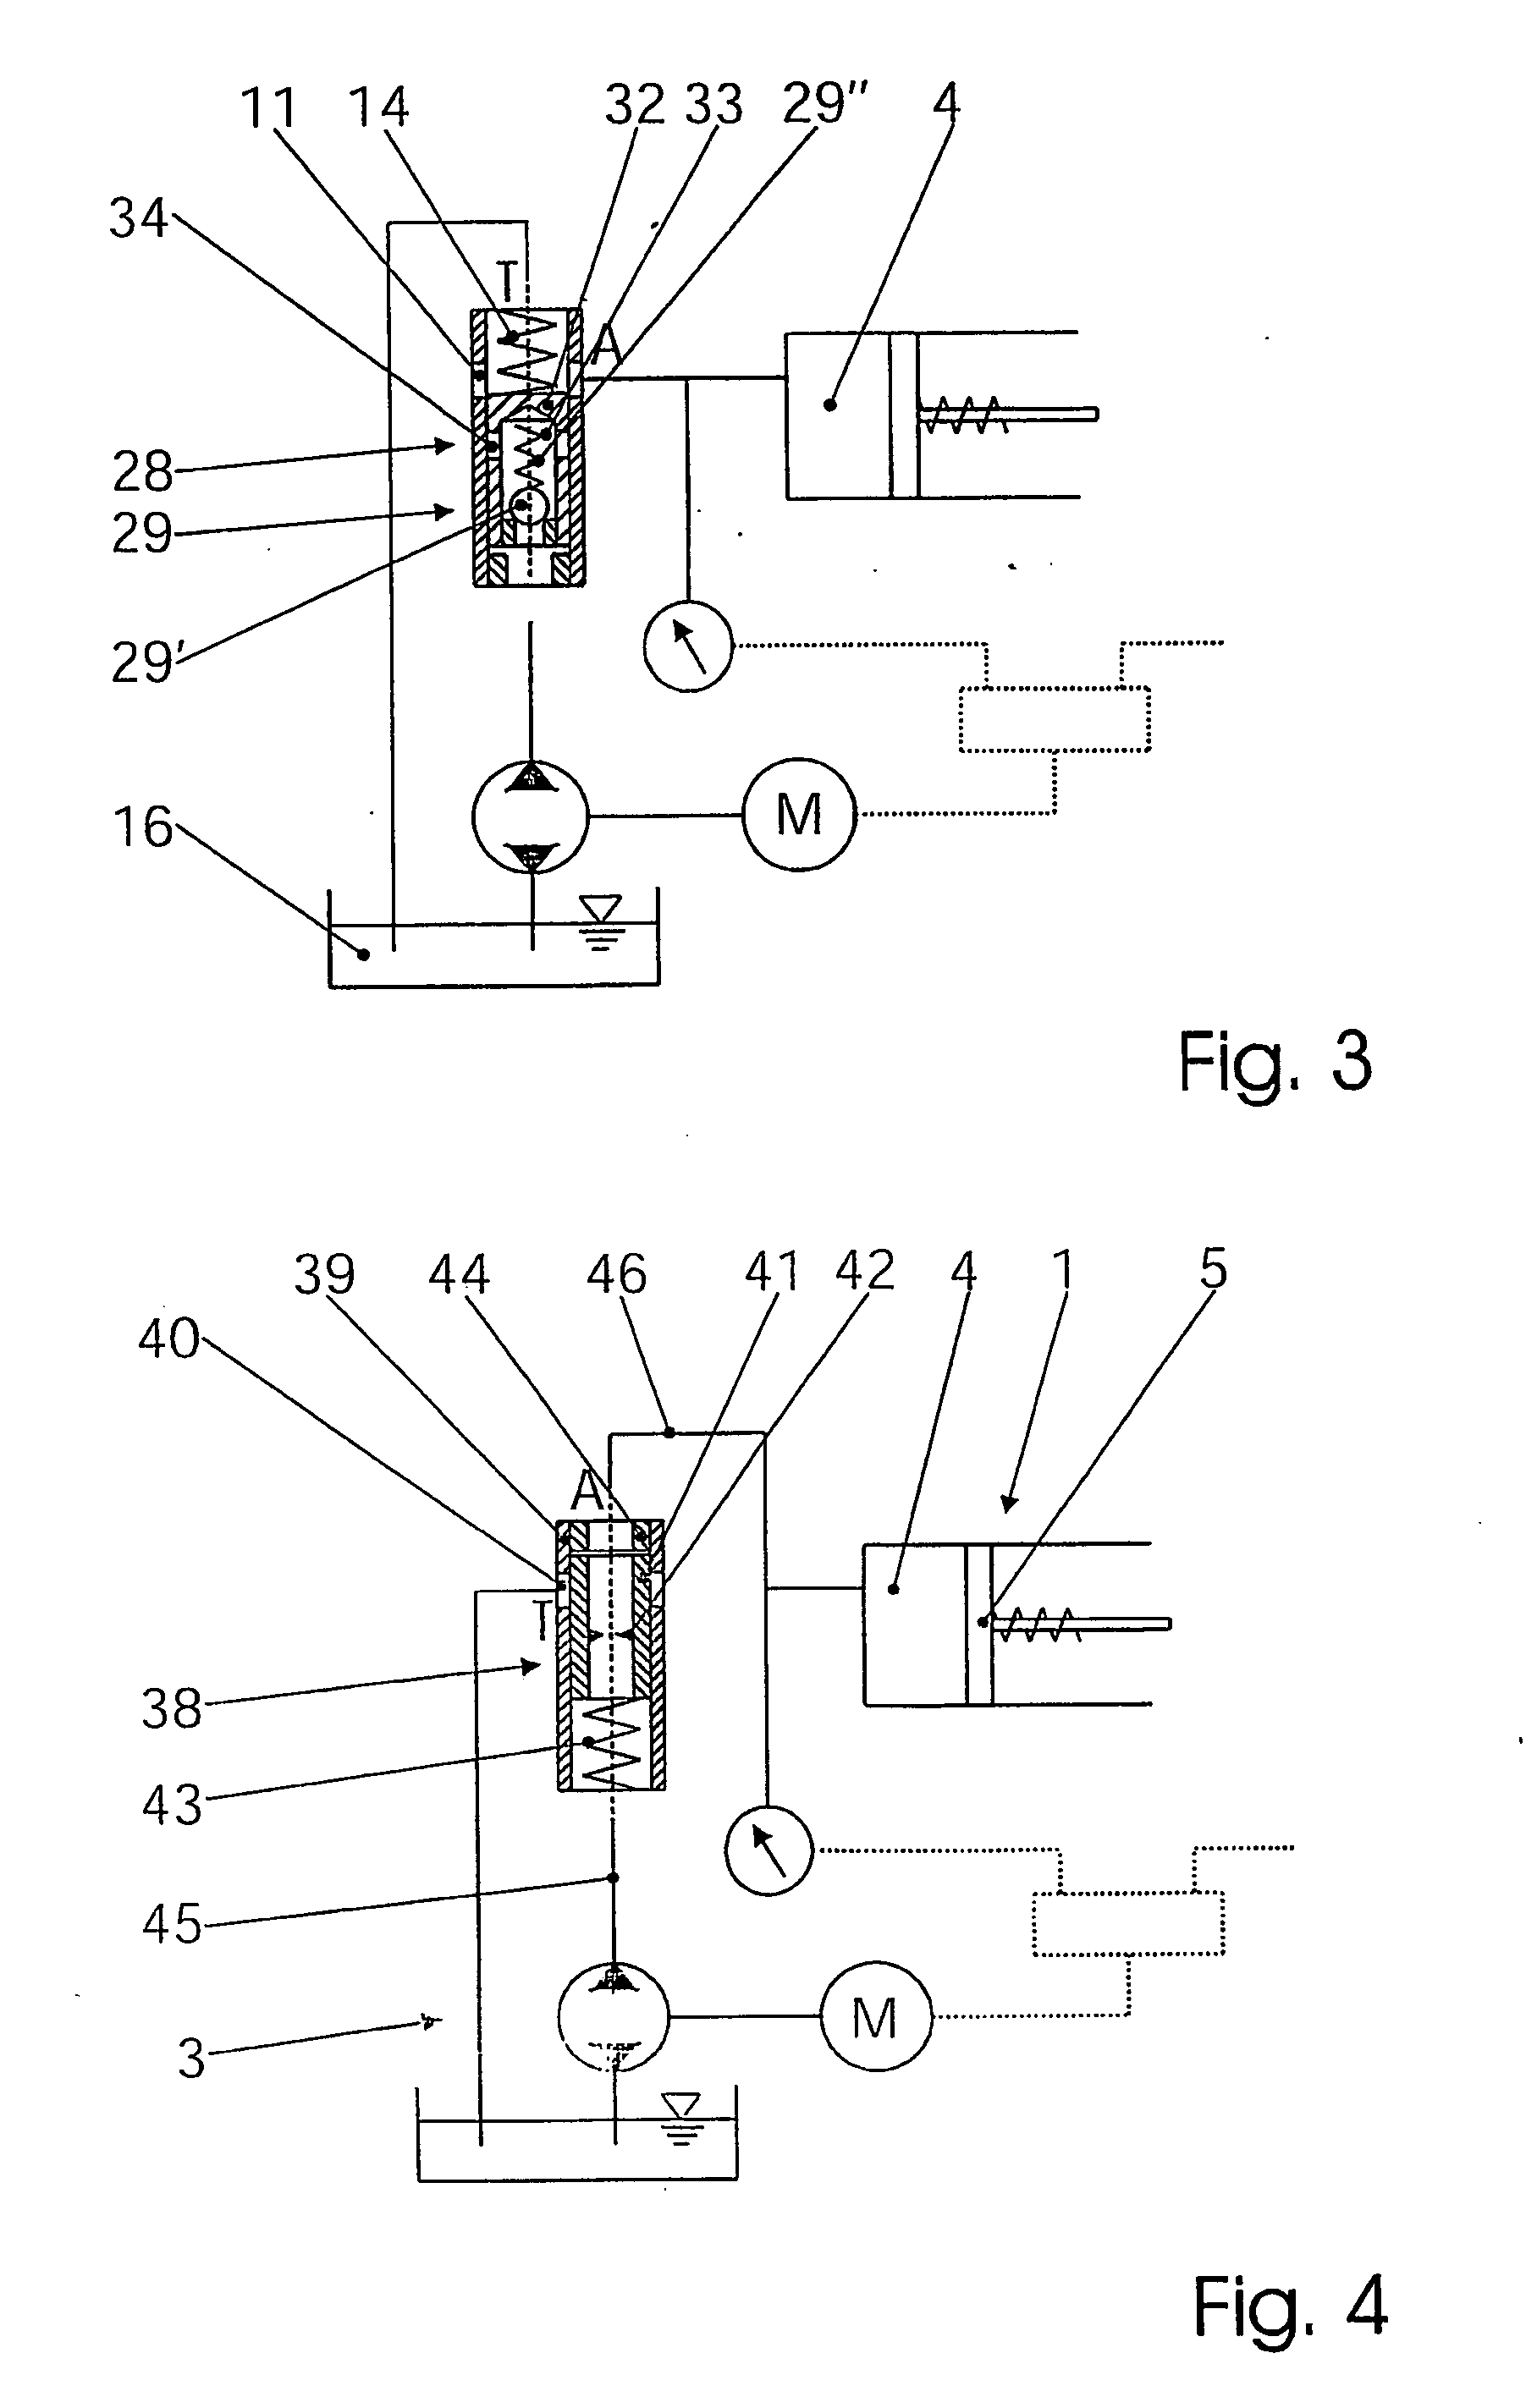 Simple action actuator with a hydraulic fast-opening valve for controlling a clutch